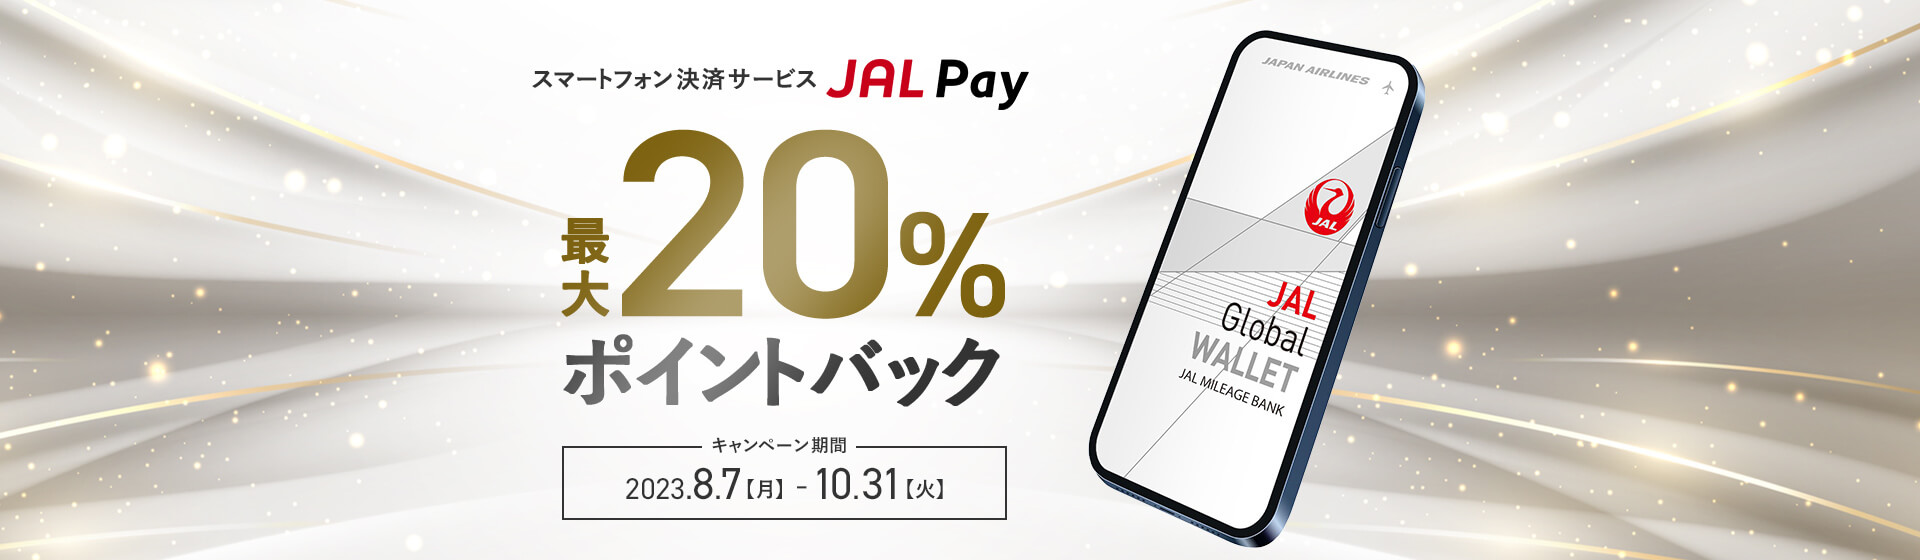 JAL Pay 最大20％ポイントバックキャンペーン